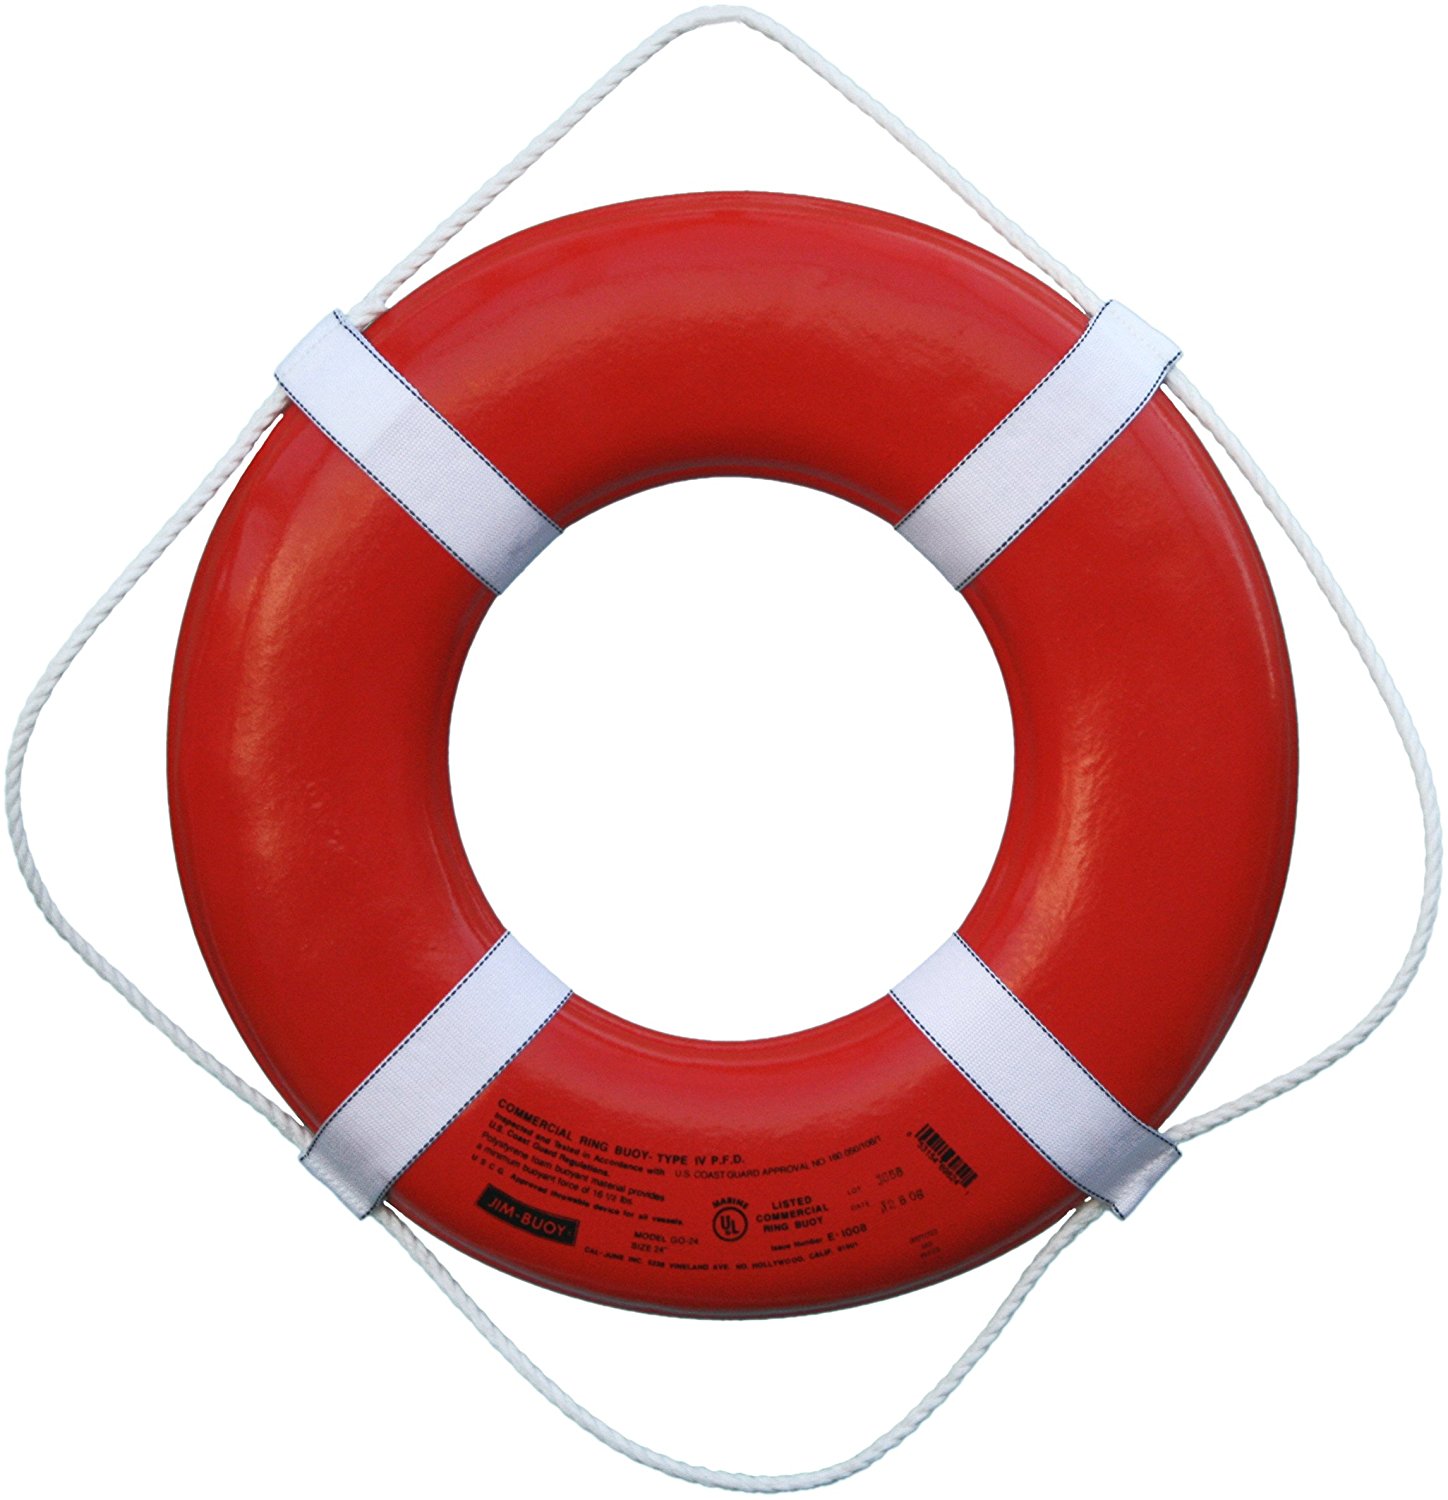 Amazon.com : Cal June USCG Approved Ring Buoy : Boat Throw Rings ...